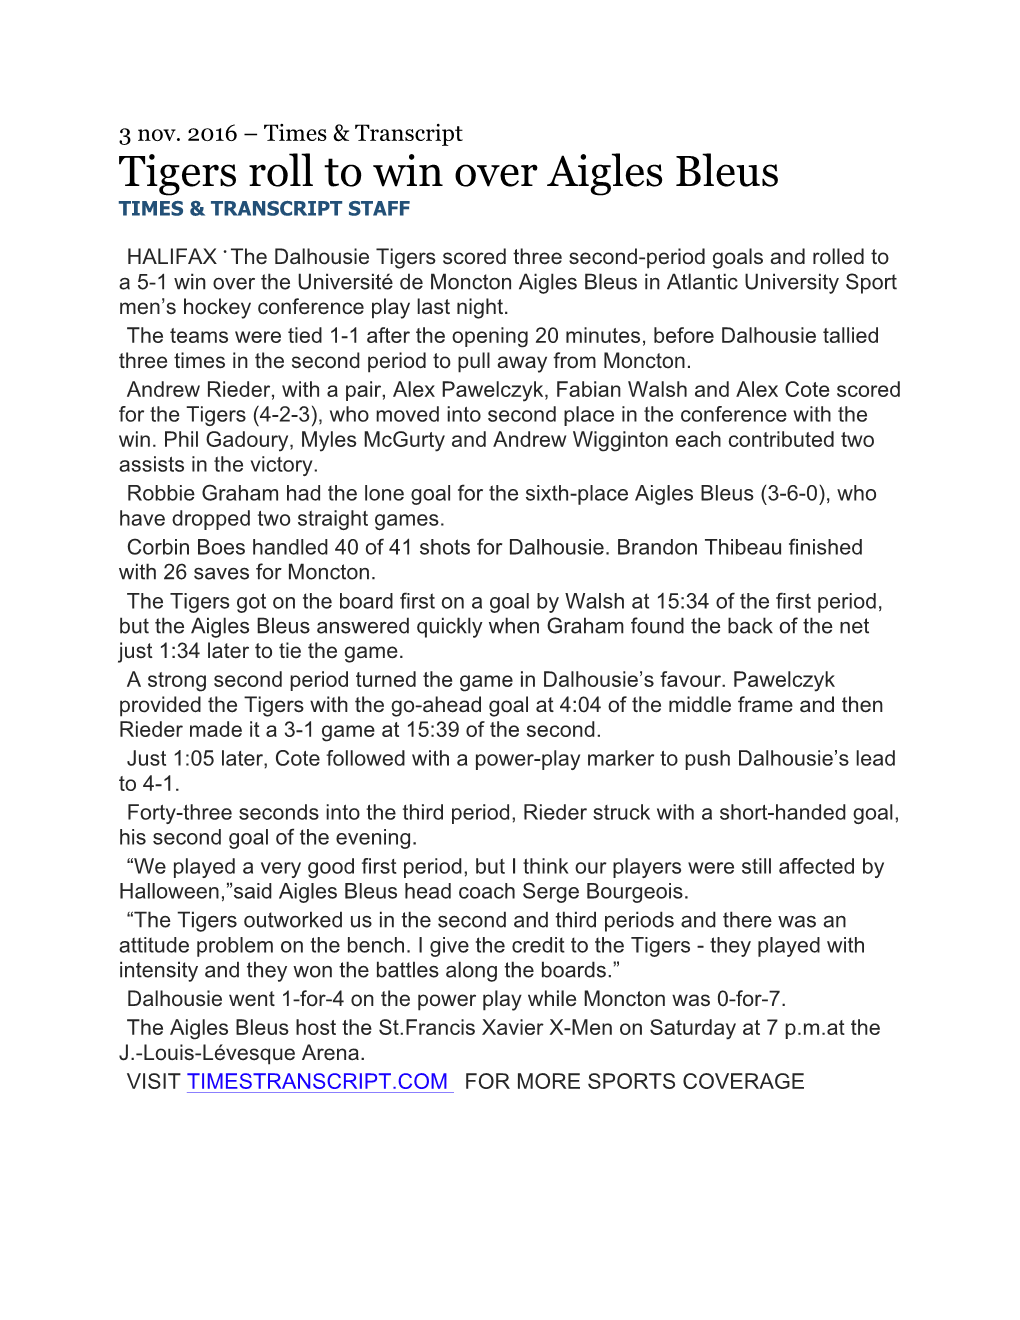 Tigers Roll to Win Over Aigles Bleus TIMES & TRANSCRIPT STAFF